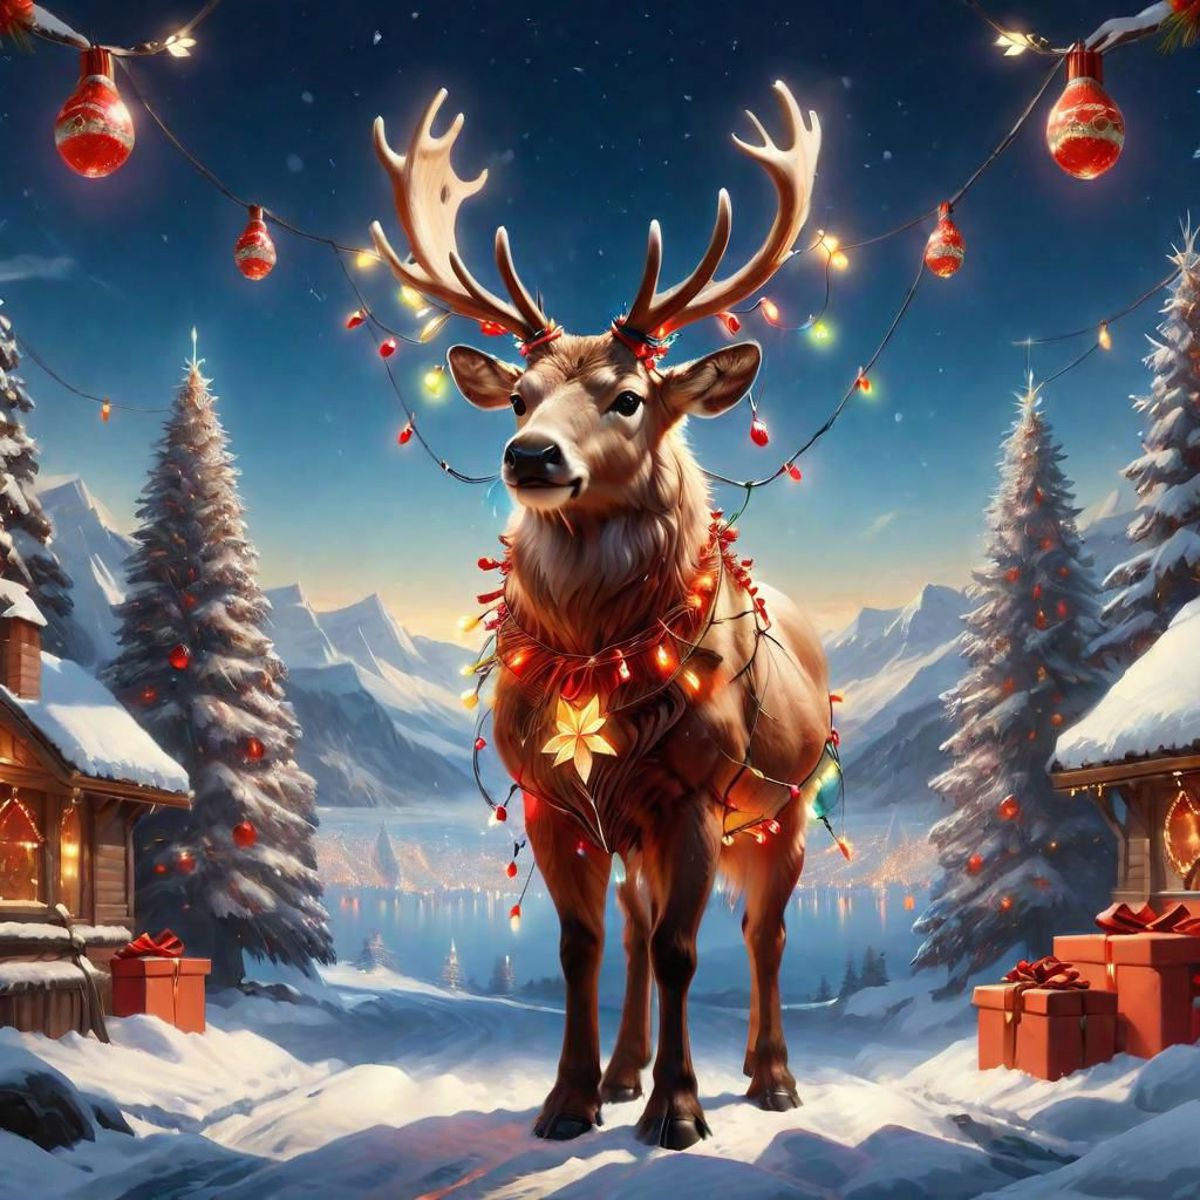 Christmas Deer with Lights in Snowy Landscape